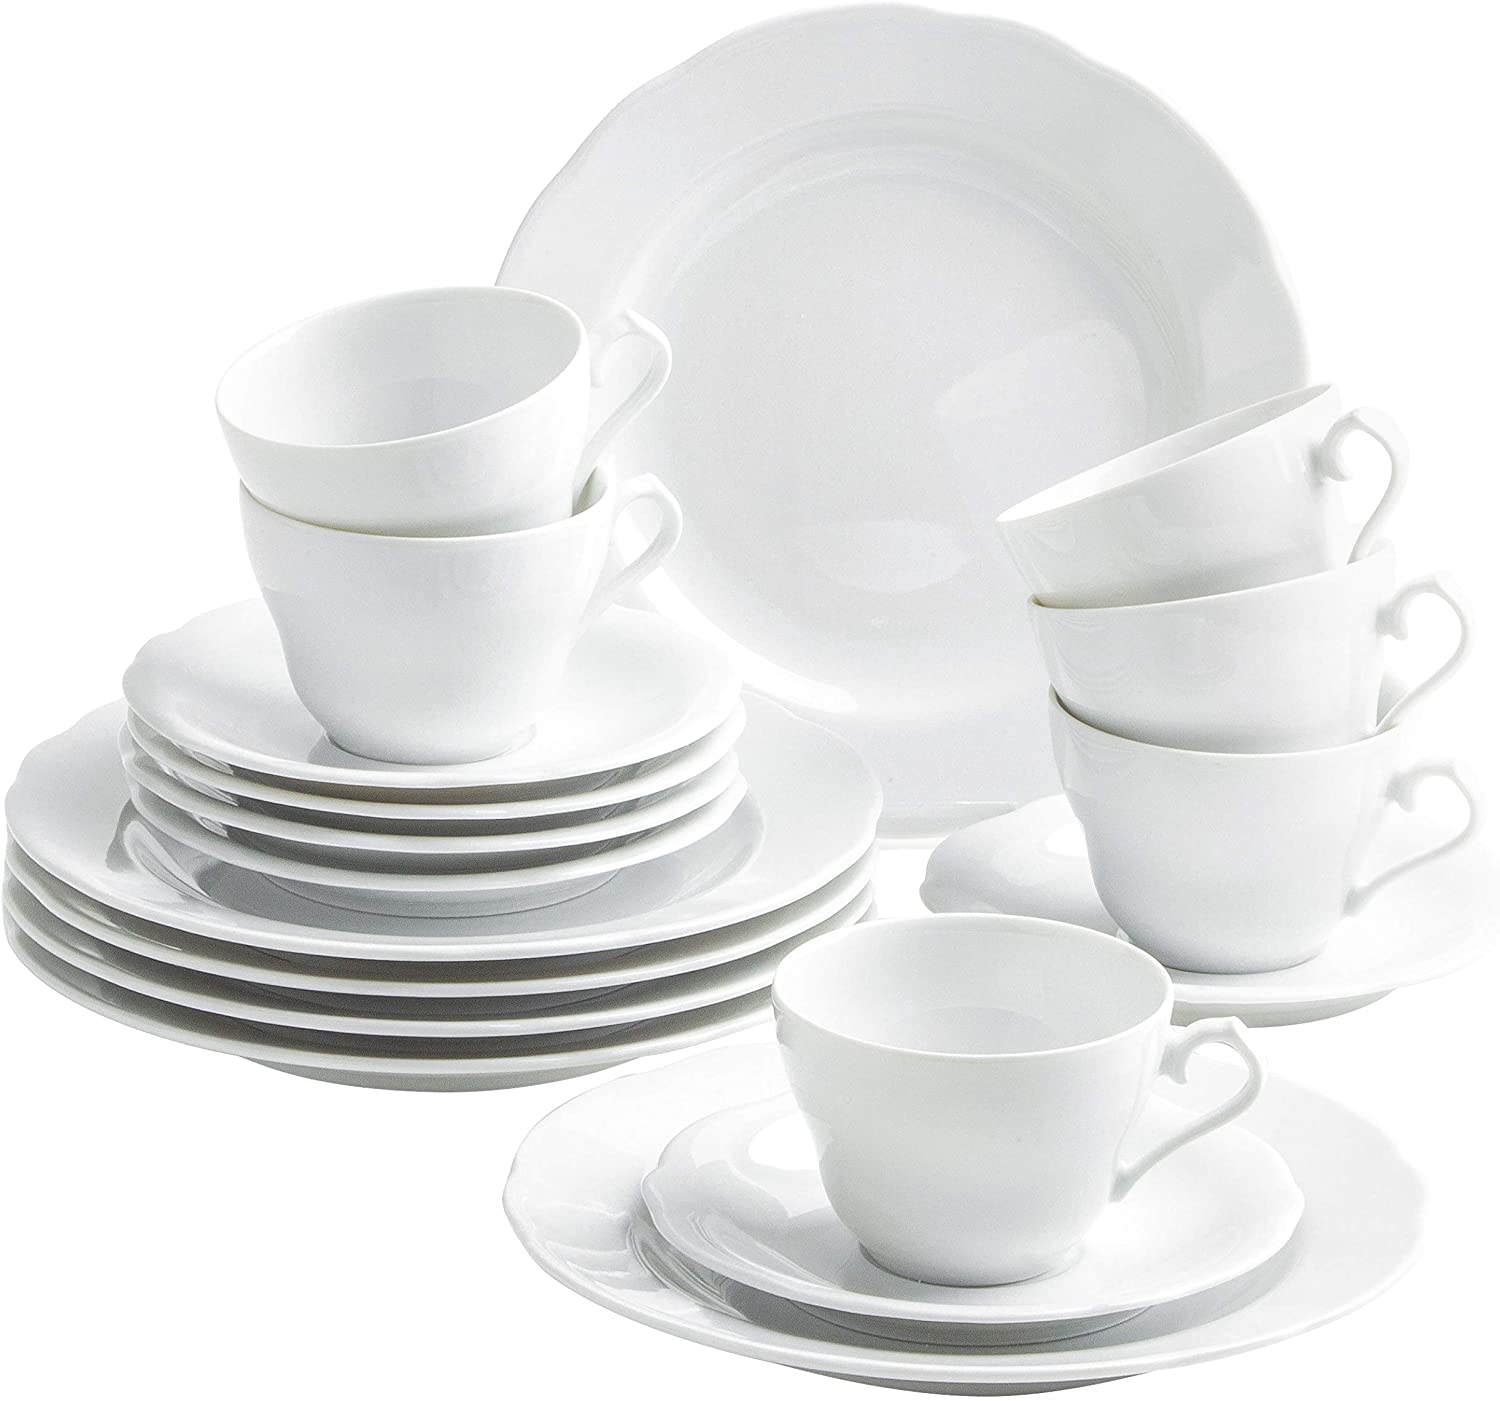 Kahla 1R0290O9001RB Basic Coffee Service Porcelain for 6 People Tea Set 18 Pieces White Round Cups Plates Saucers Classic Modern